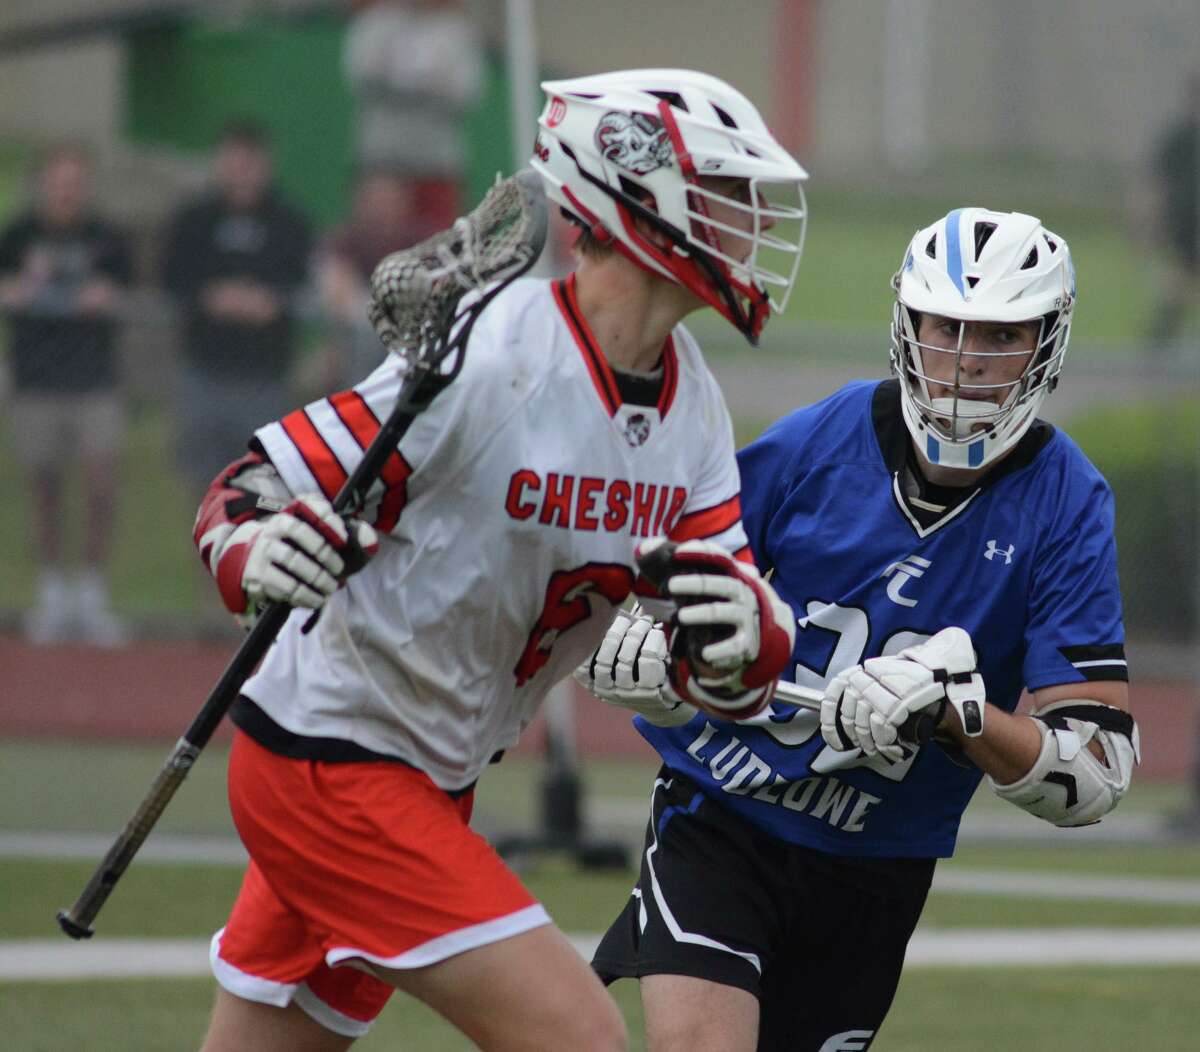 Ludlowe’s Zack Hathaway, right, defends Cheshire’s Jack Lovelace during a first-round Class L boys lacrosse game on Wednesday in Cheshire.